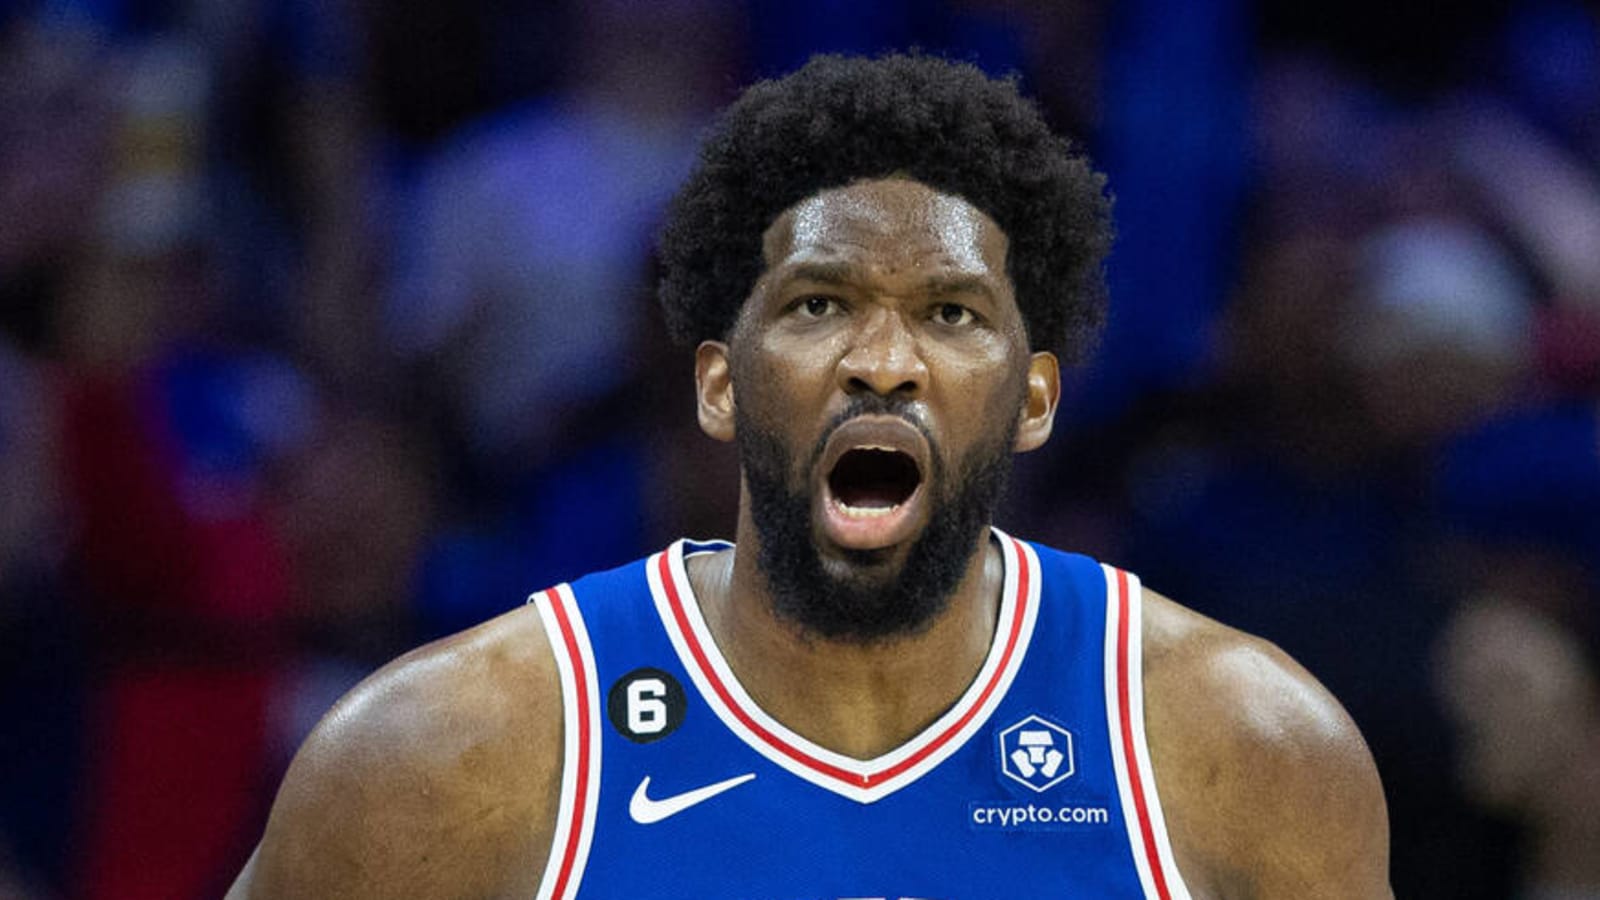 76ers' Embiid takes jab at Nets HC after Game 2 win